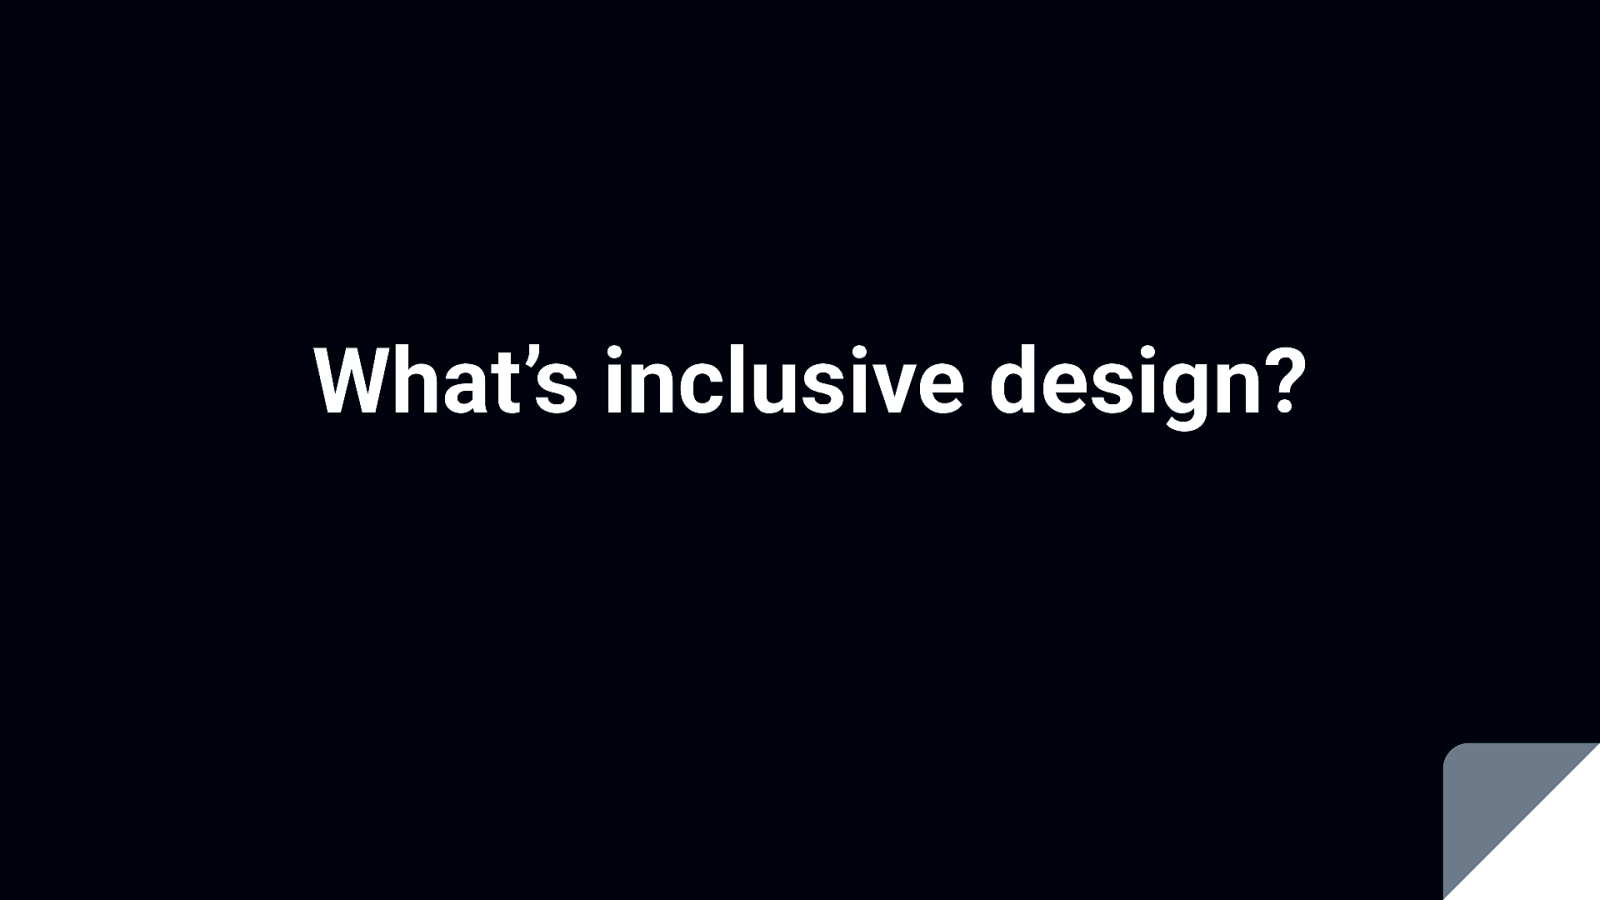 What is inclusive design?